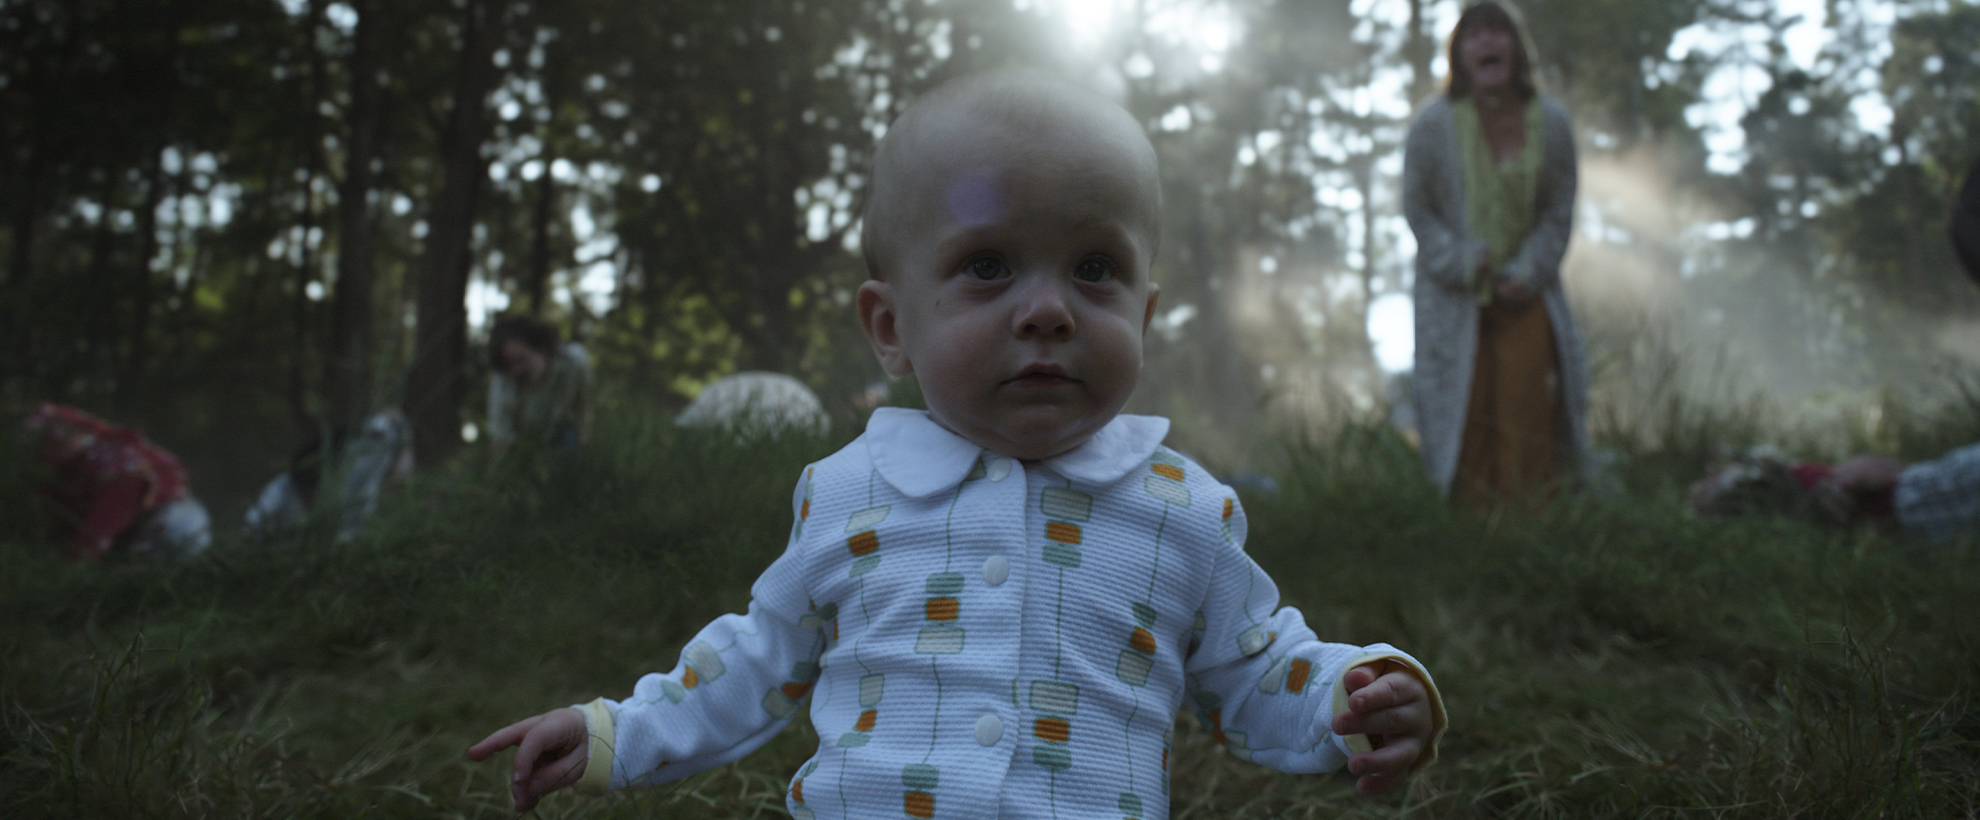 A baby toddles towards the camera, in a forest setting, with a woman screaming in the background, out of focus